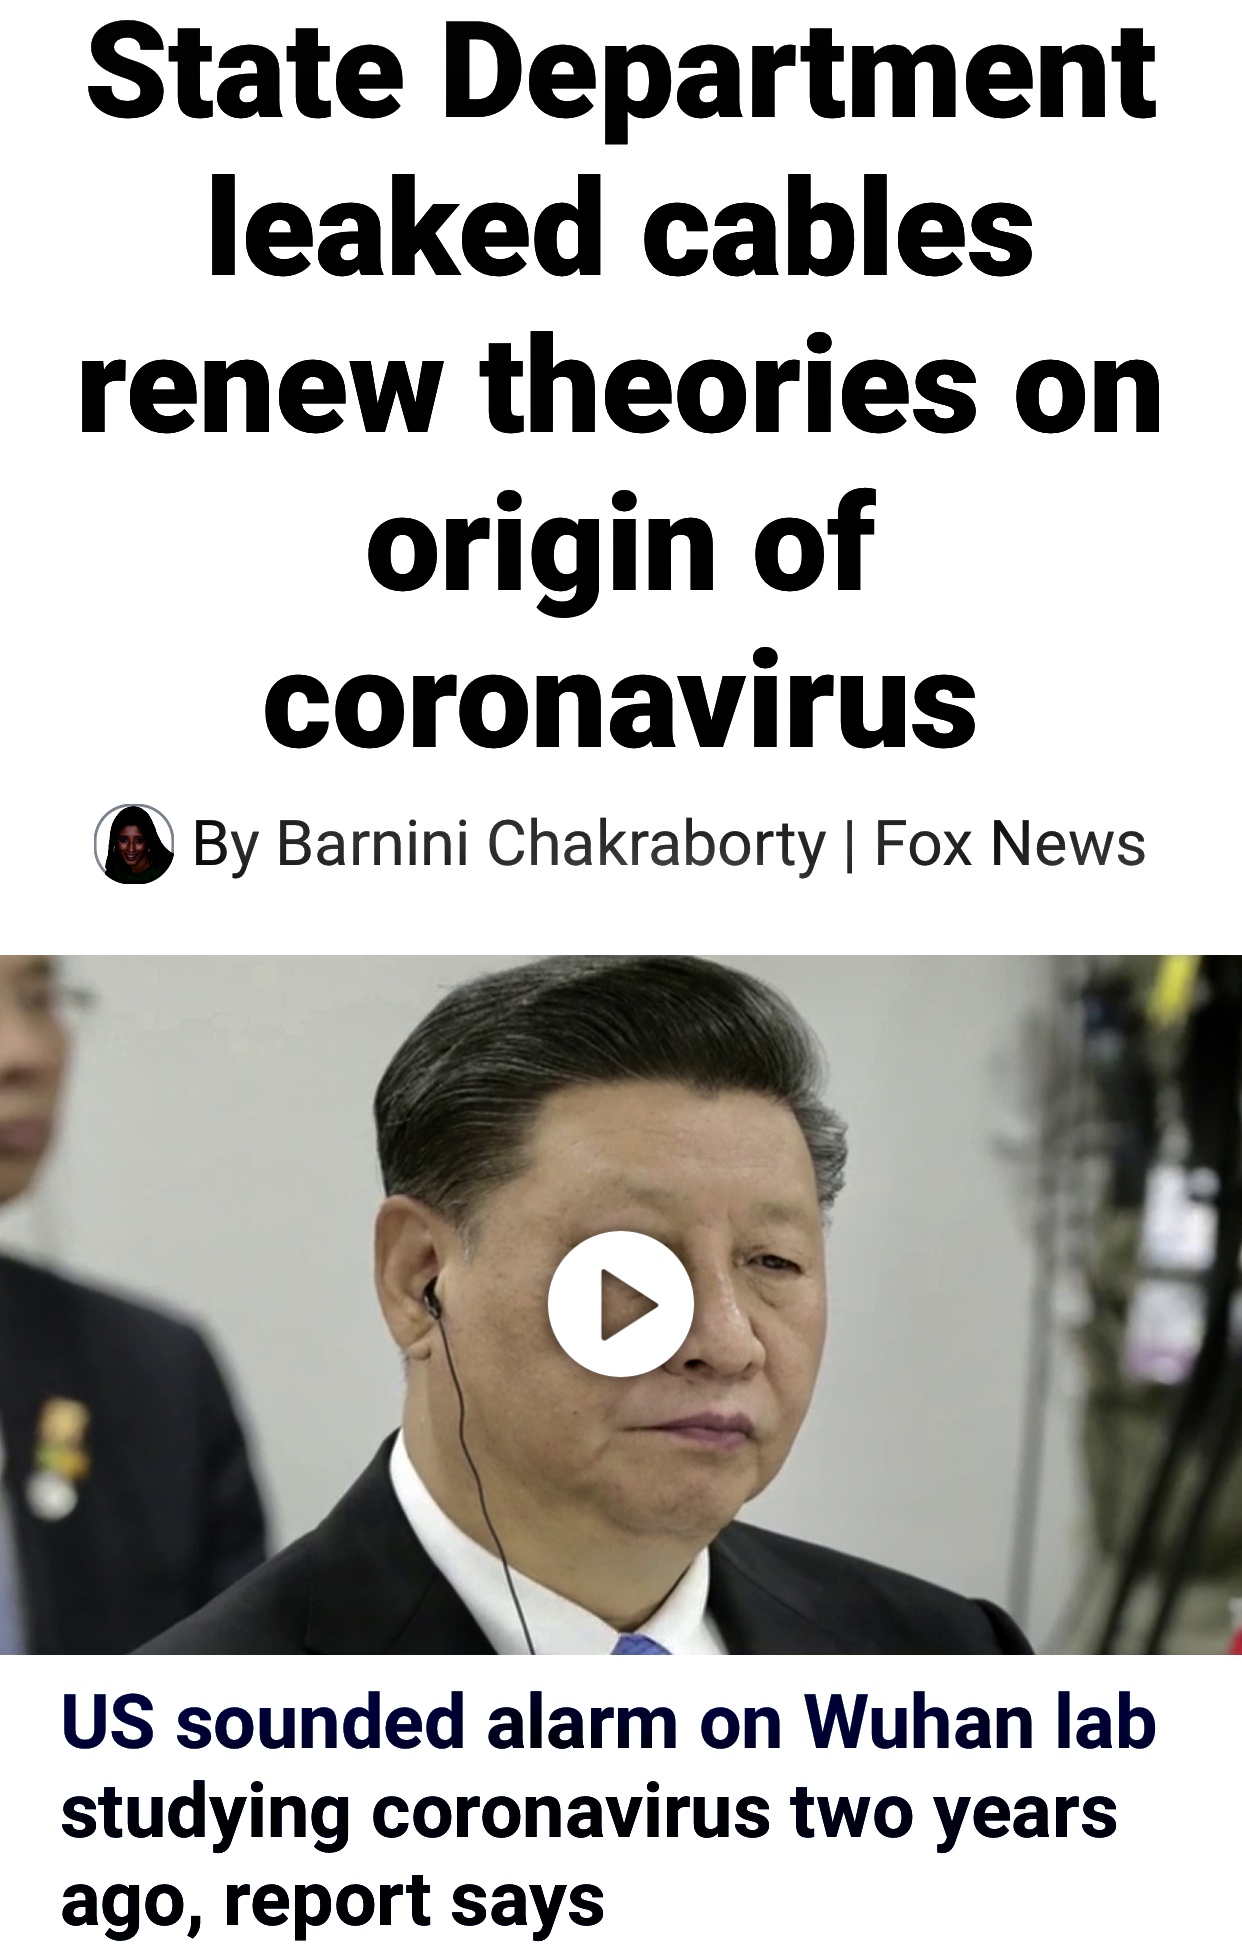 State Department Leaked Cables Renewing Theories of Origin On Coronavirus